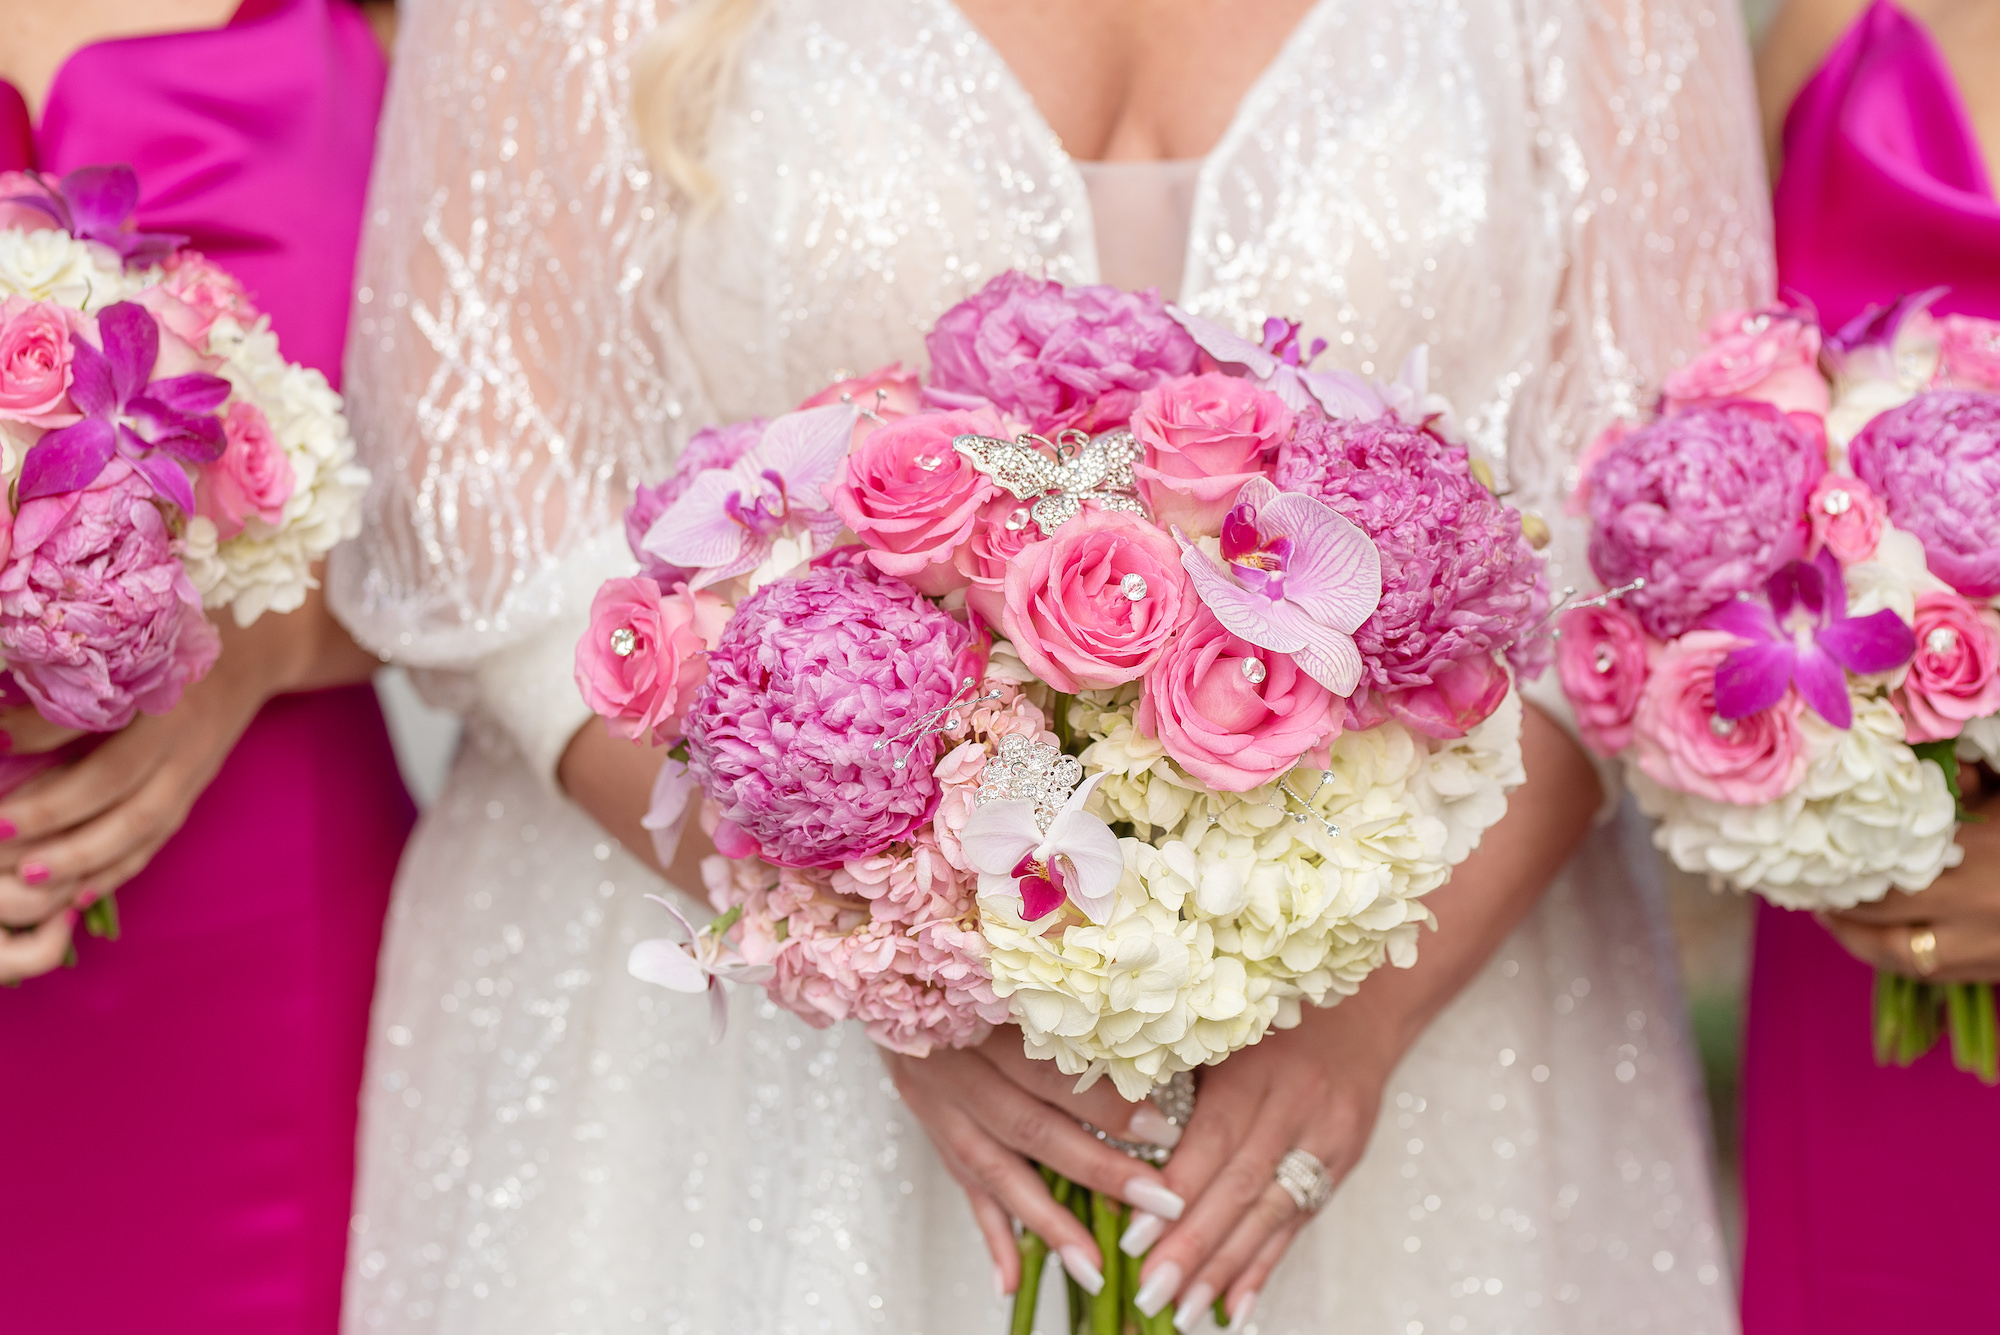 Pink Bridal Bouquet with White Details Wedding Portrait | Tampa Photographer Kristen Marie Photography